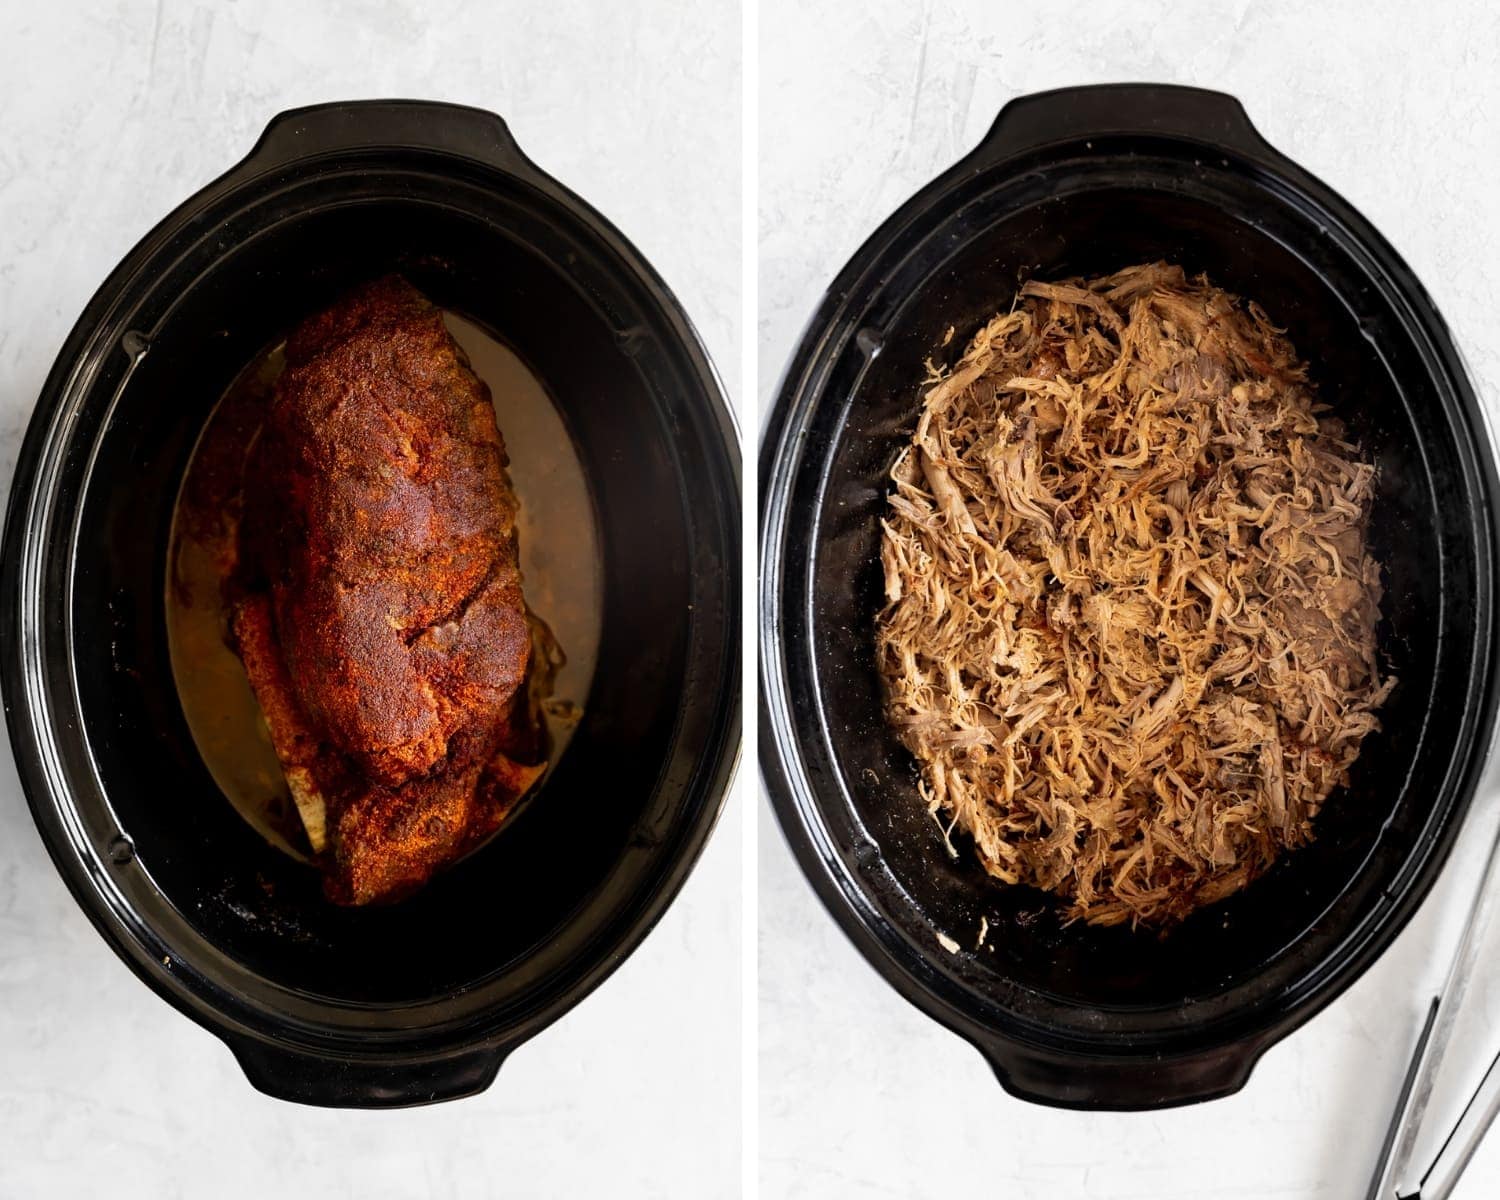 pulled pork in the slow cooker before and after cooking